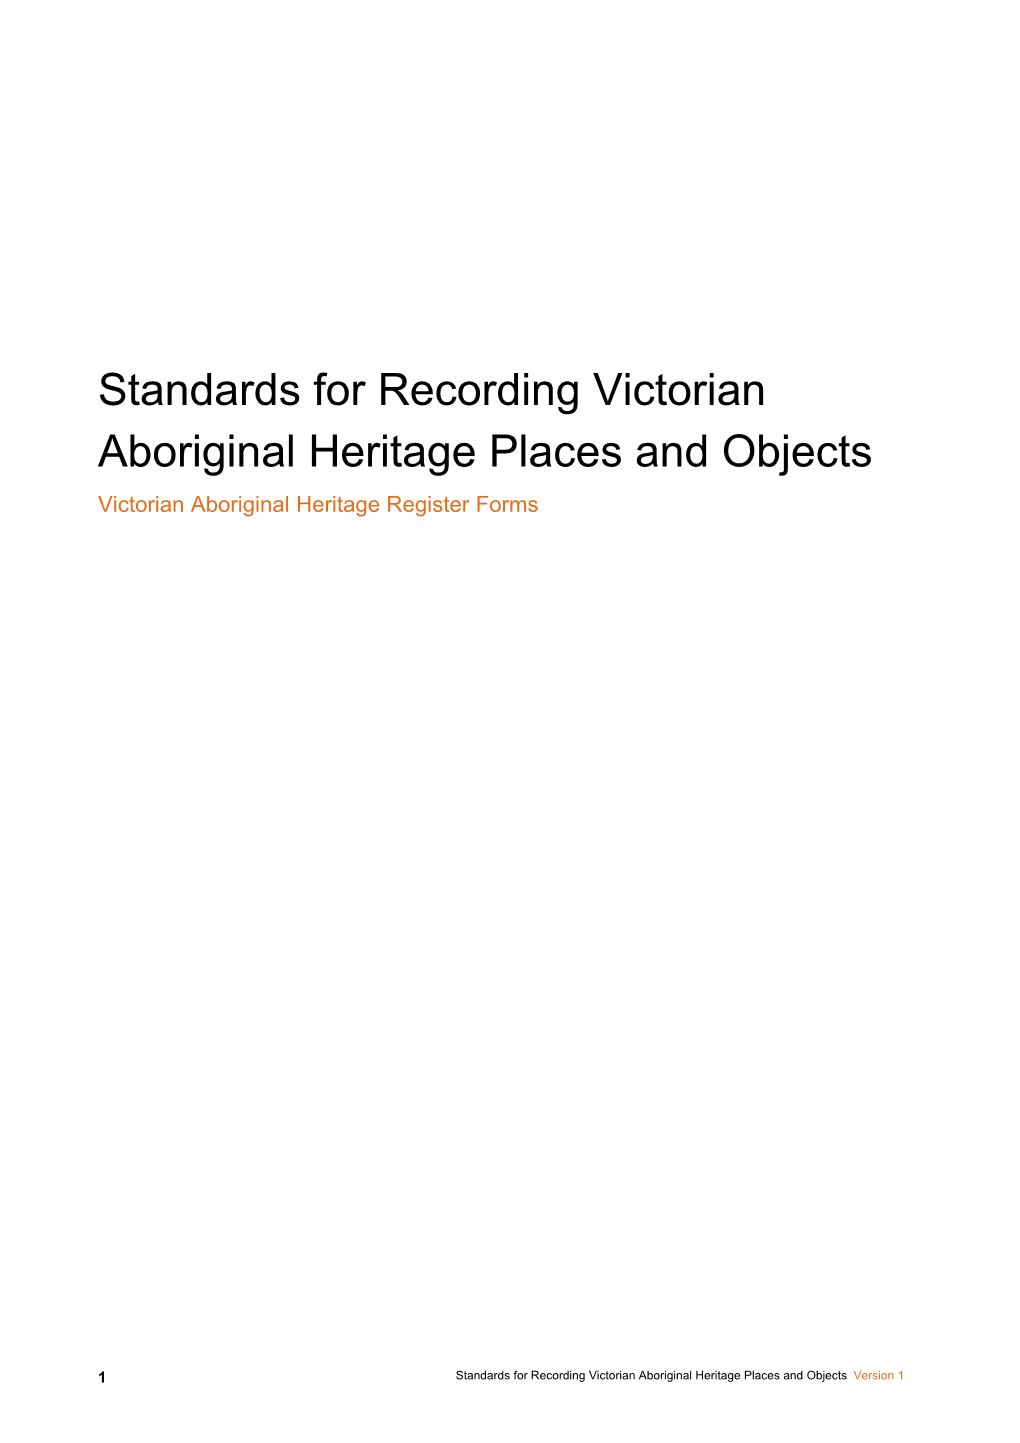 Standards for Recording Victorian Aboriginal Heritage Places and Objects